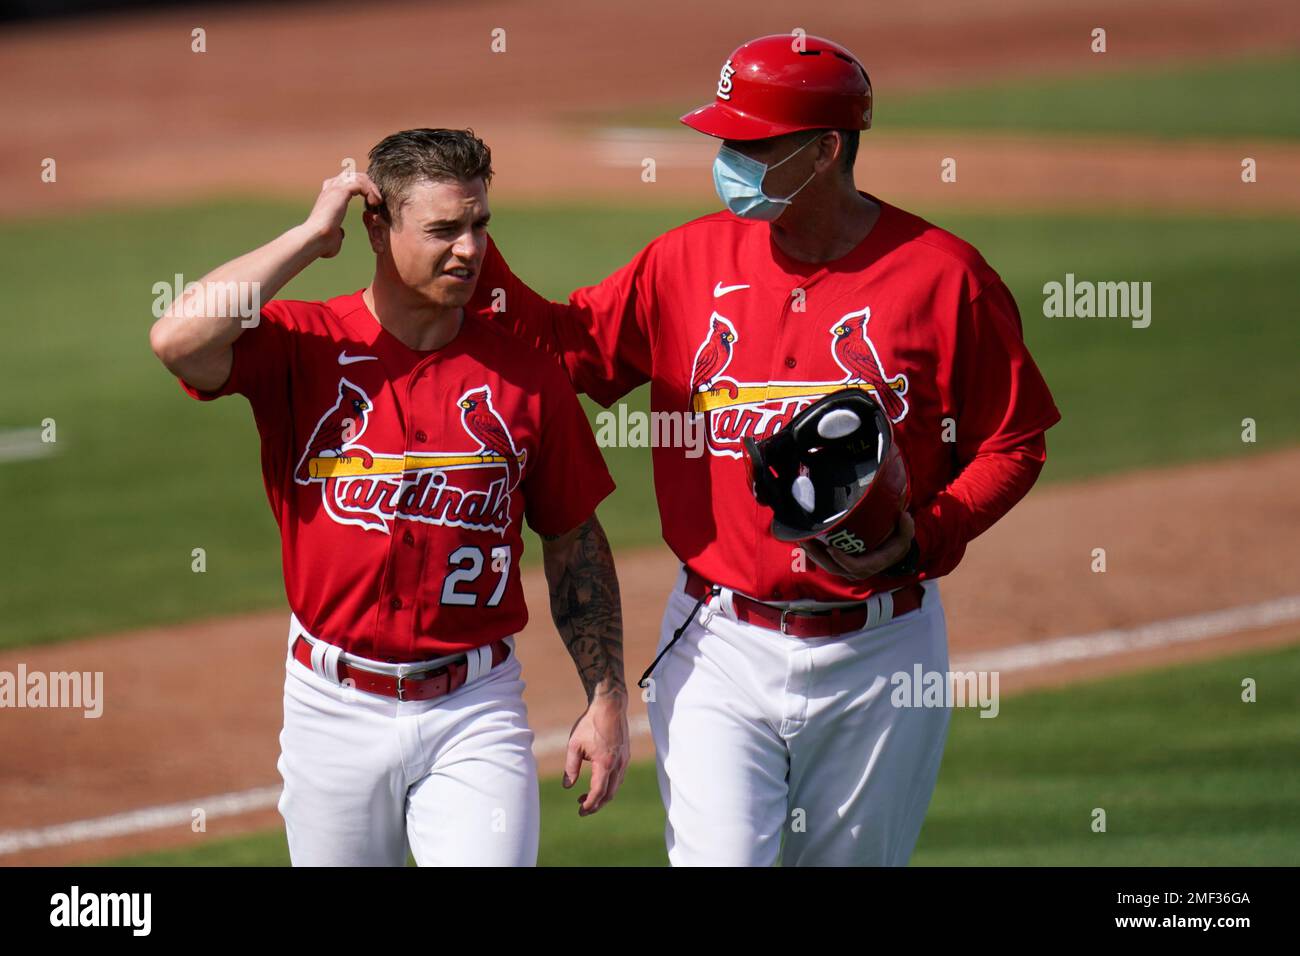 Uniforms worn for St. Louis Cardinals at Chicago Cubs on July 27